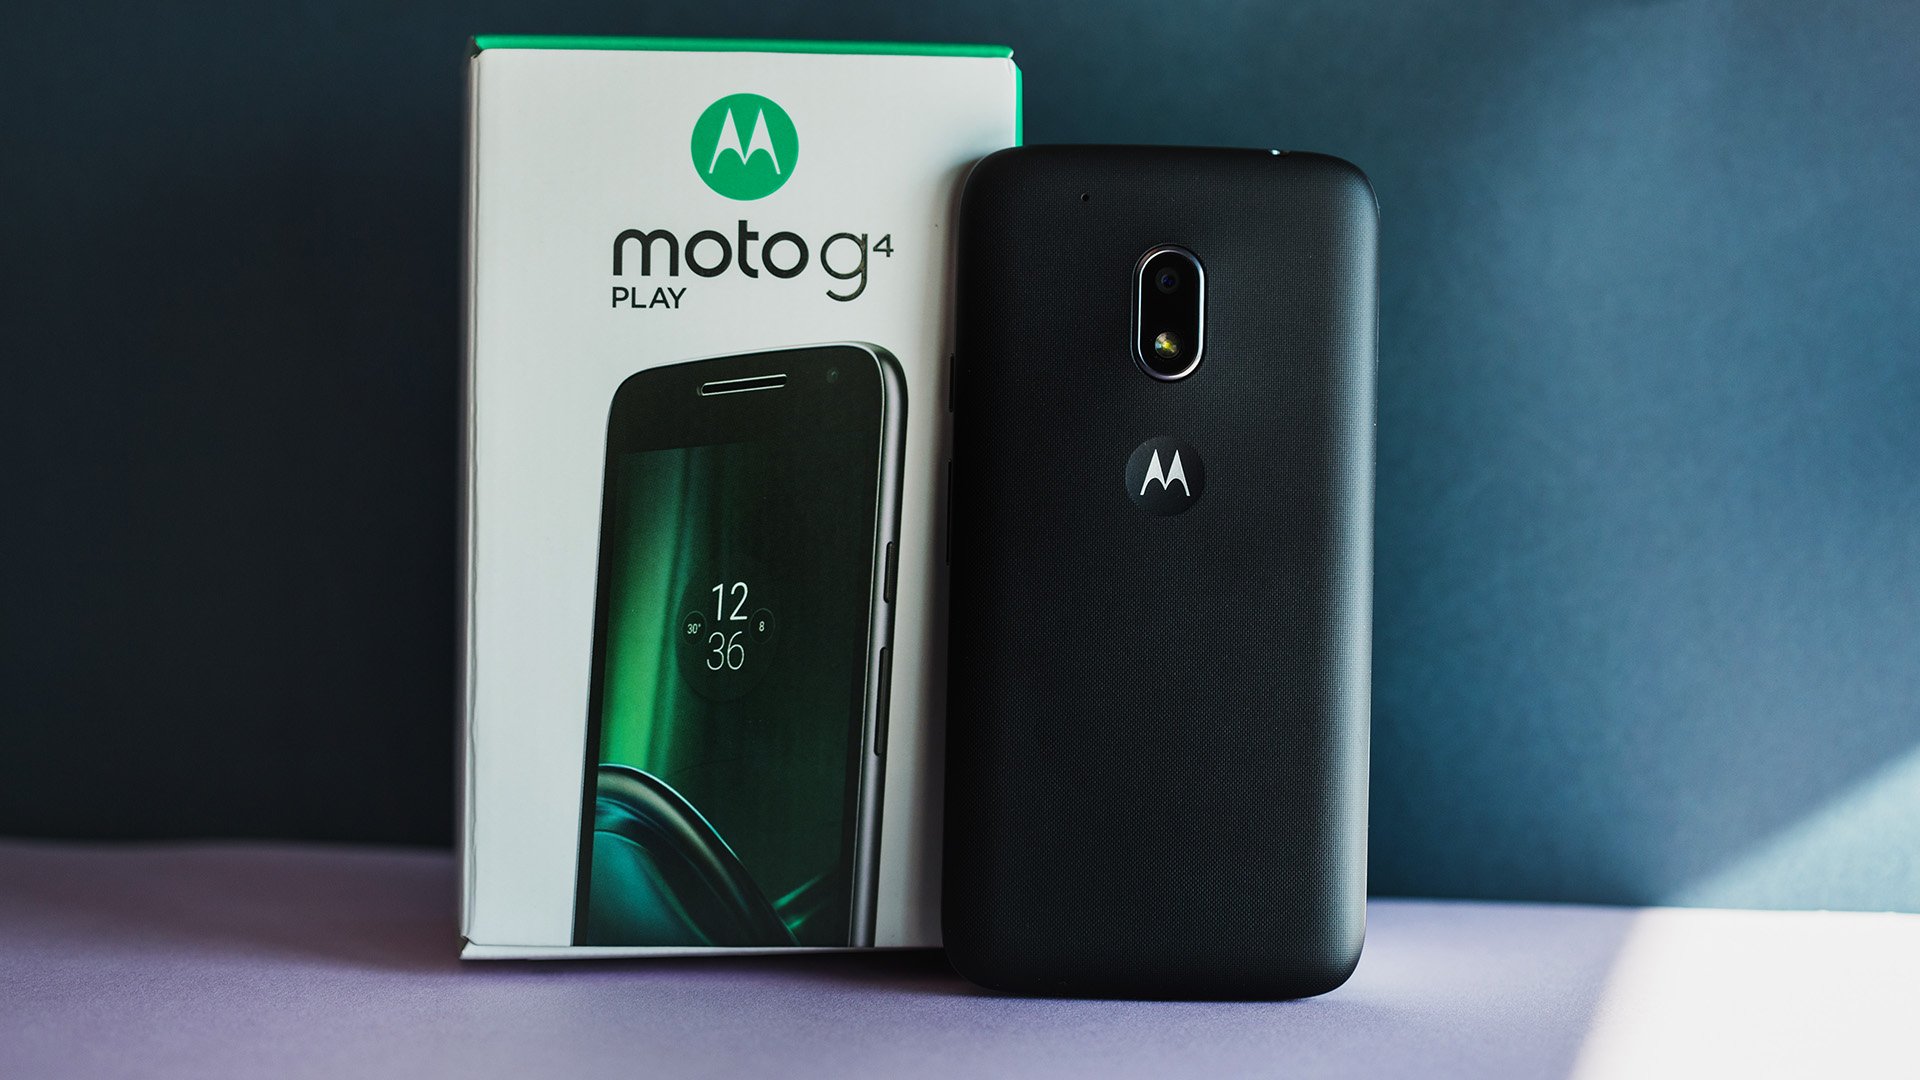 Moto G4 Play Review: What Are The Pros And Cons?